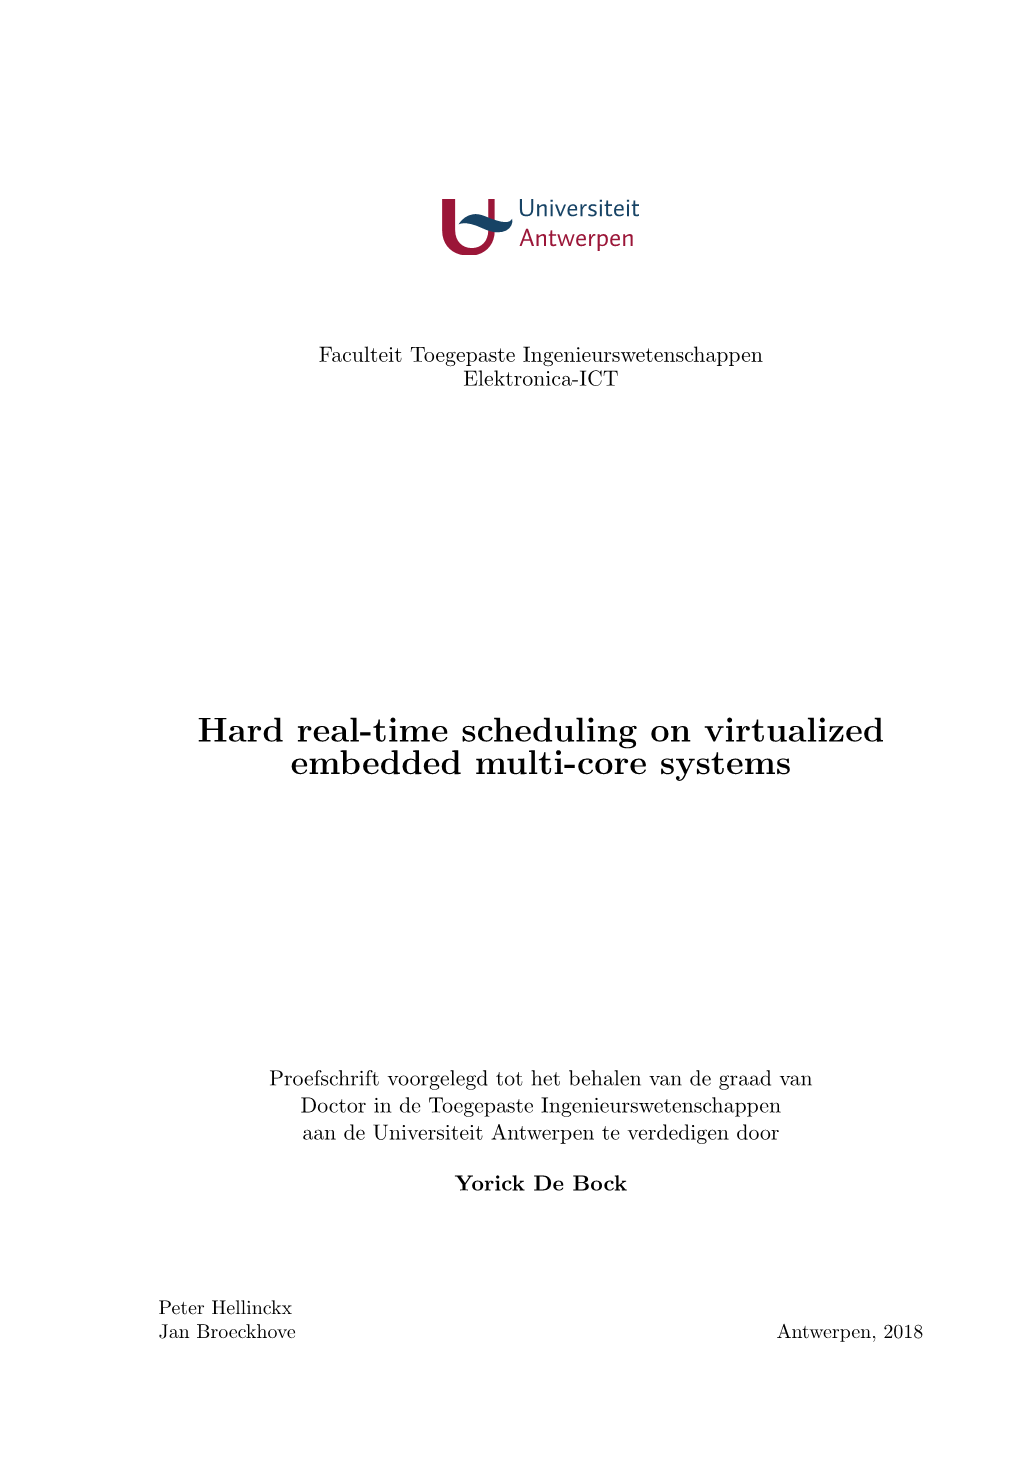 Hard Real-Time Scheduling on Virtualized Embedded Multi-Core Systems